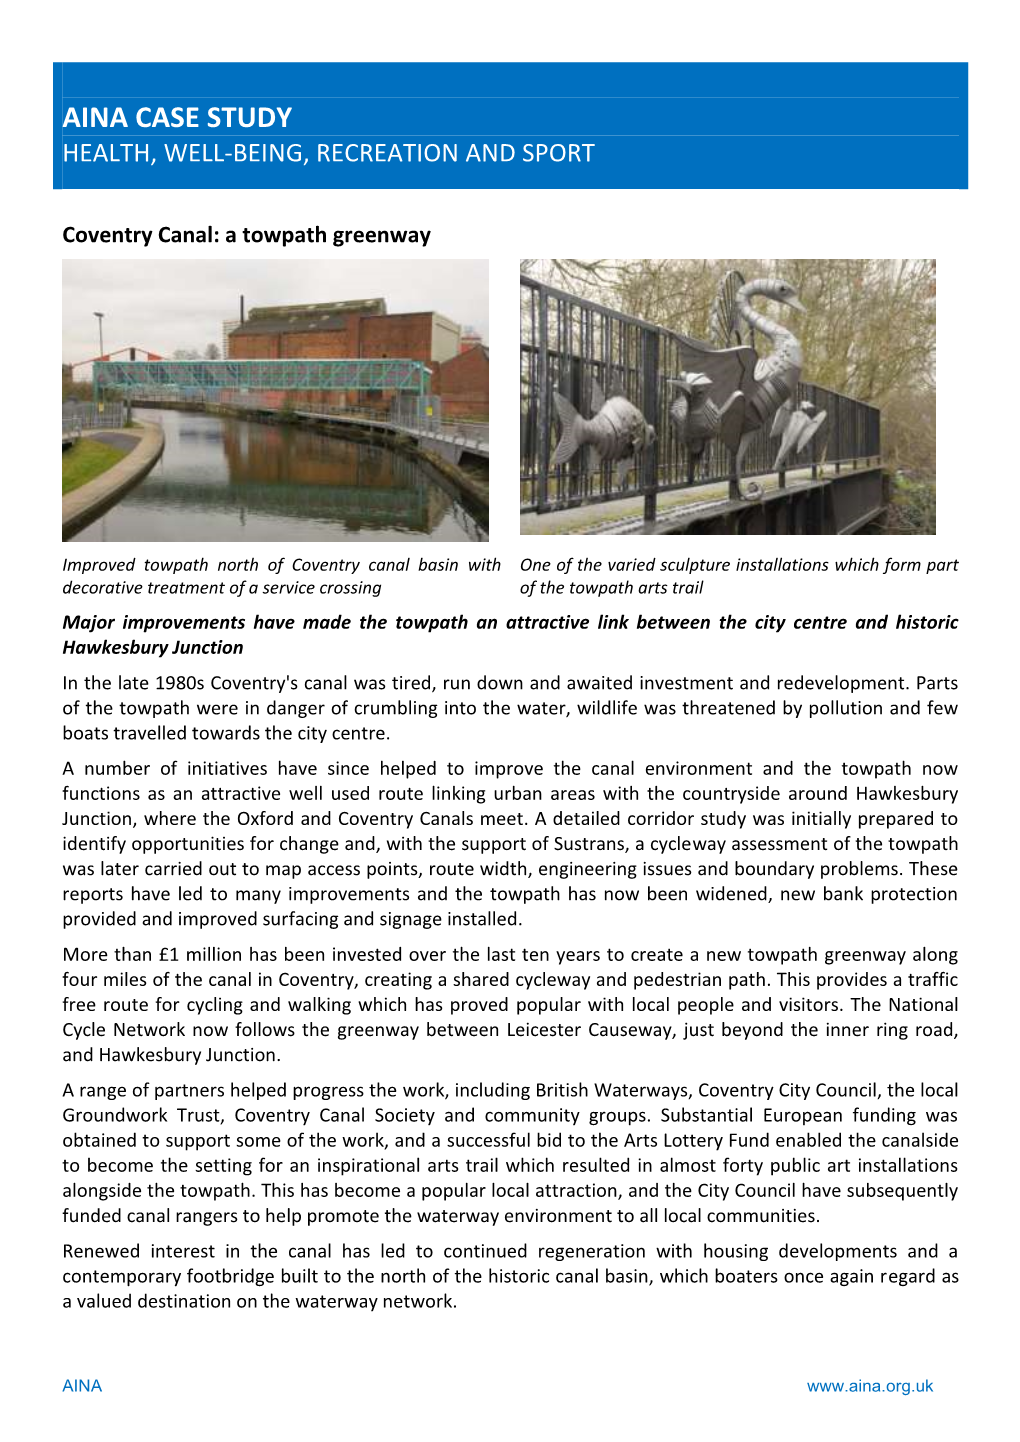 Coventry Canal: a Towpath Greenway